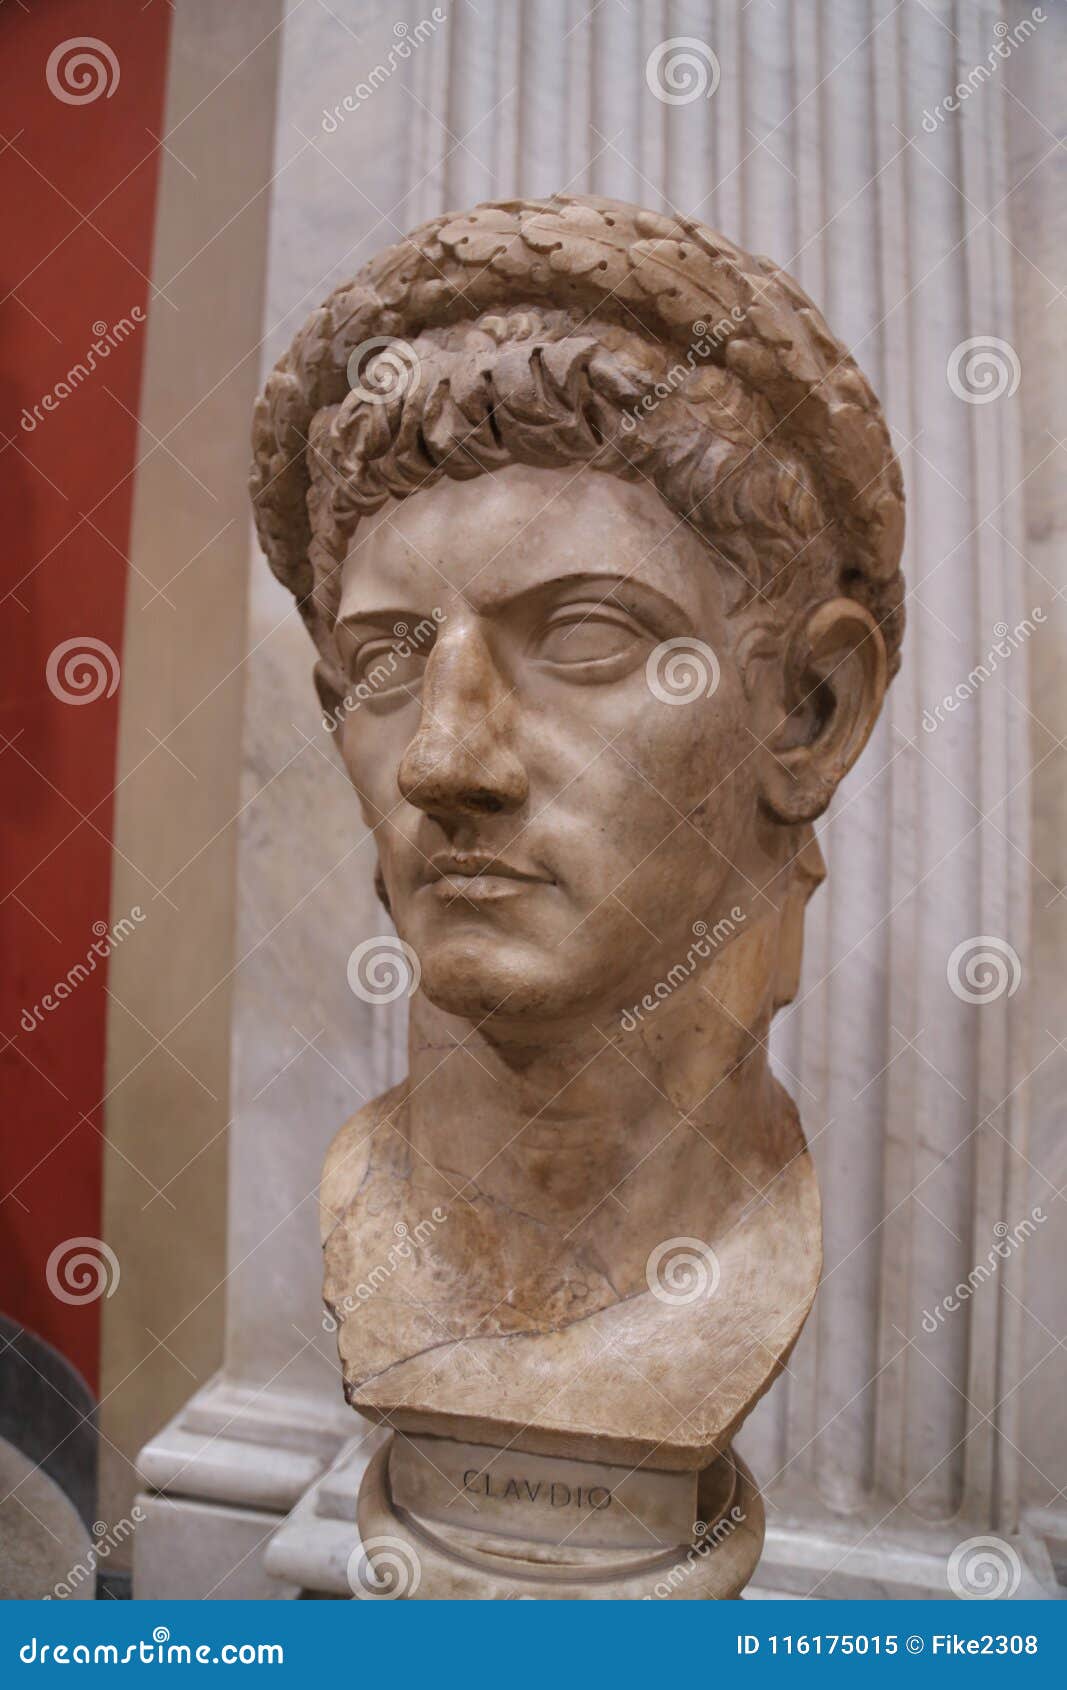 Bust of Claudius at the Vatican Editorial Image - Image of treasury ...